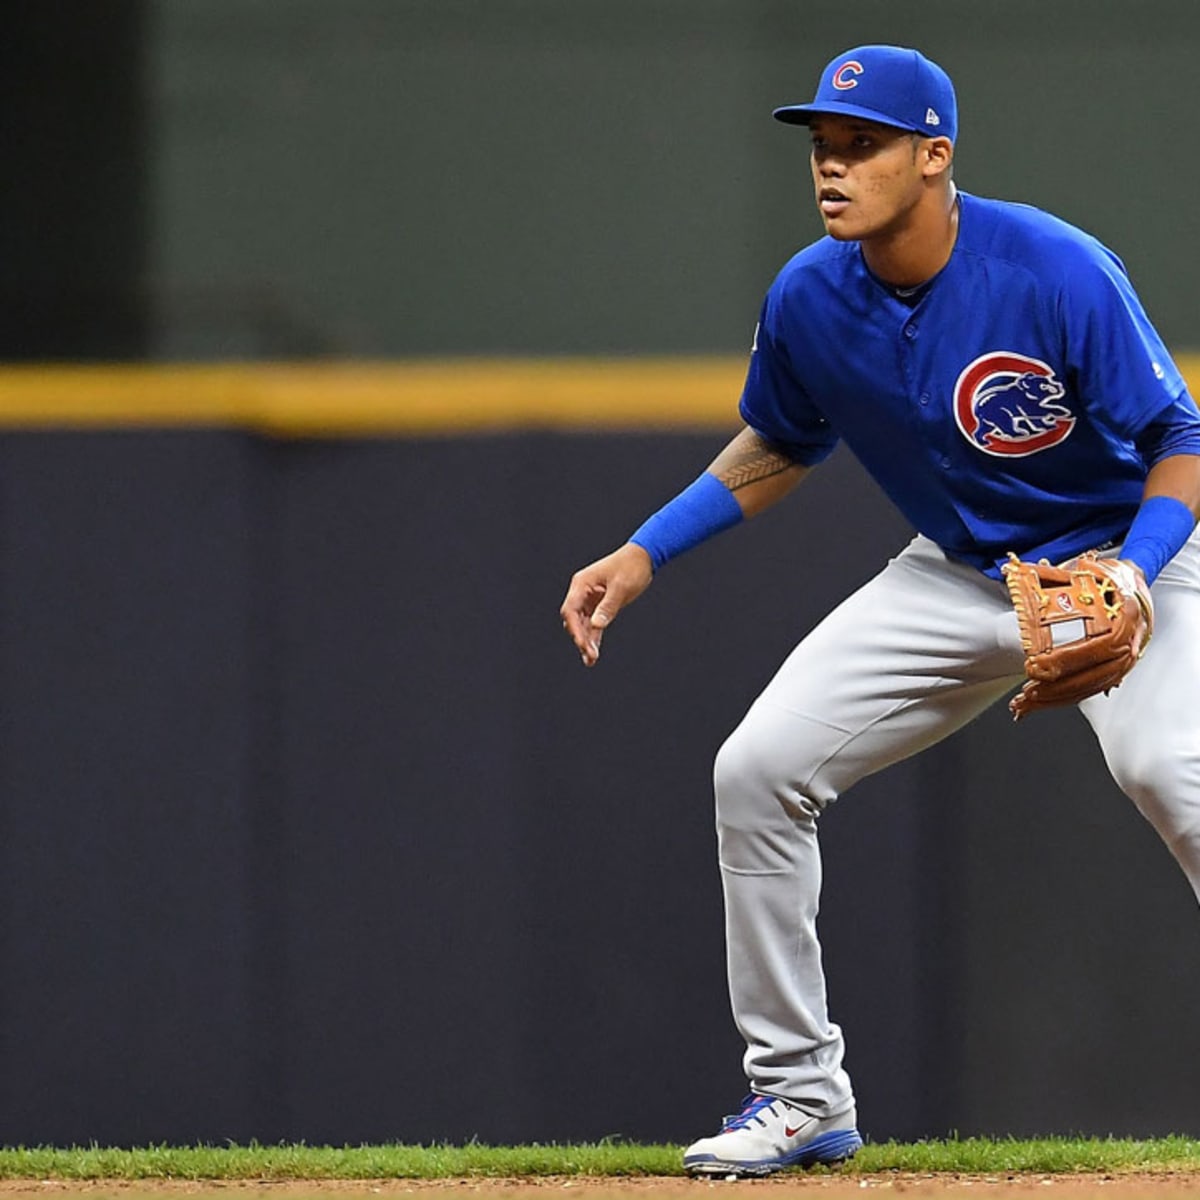 Addison Russell's Ex-Wife Alleges Physical And Emotional Abuse